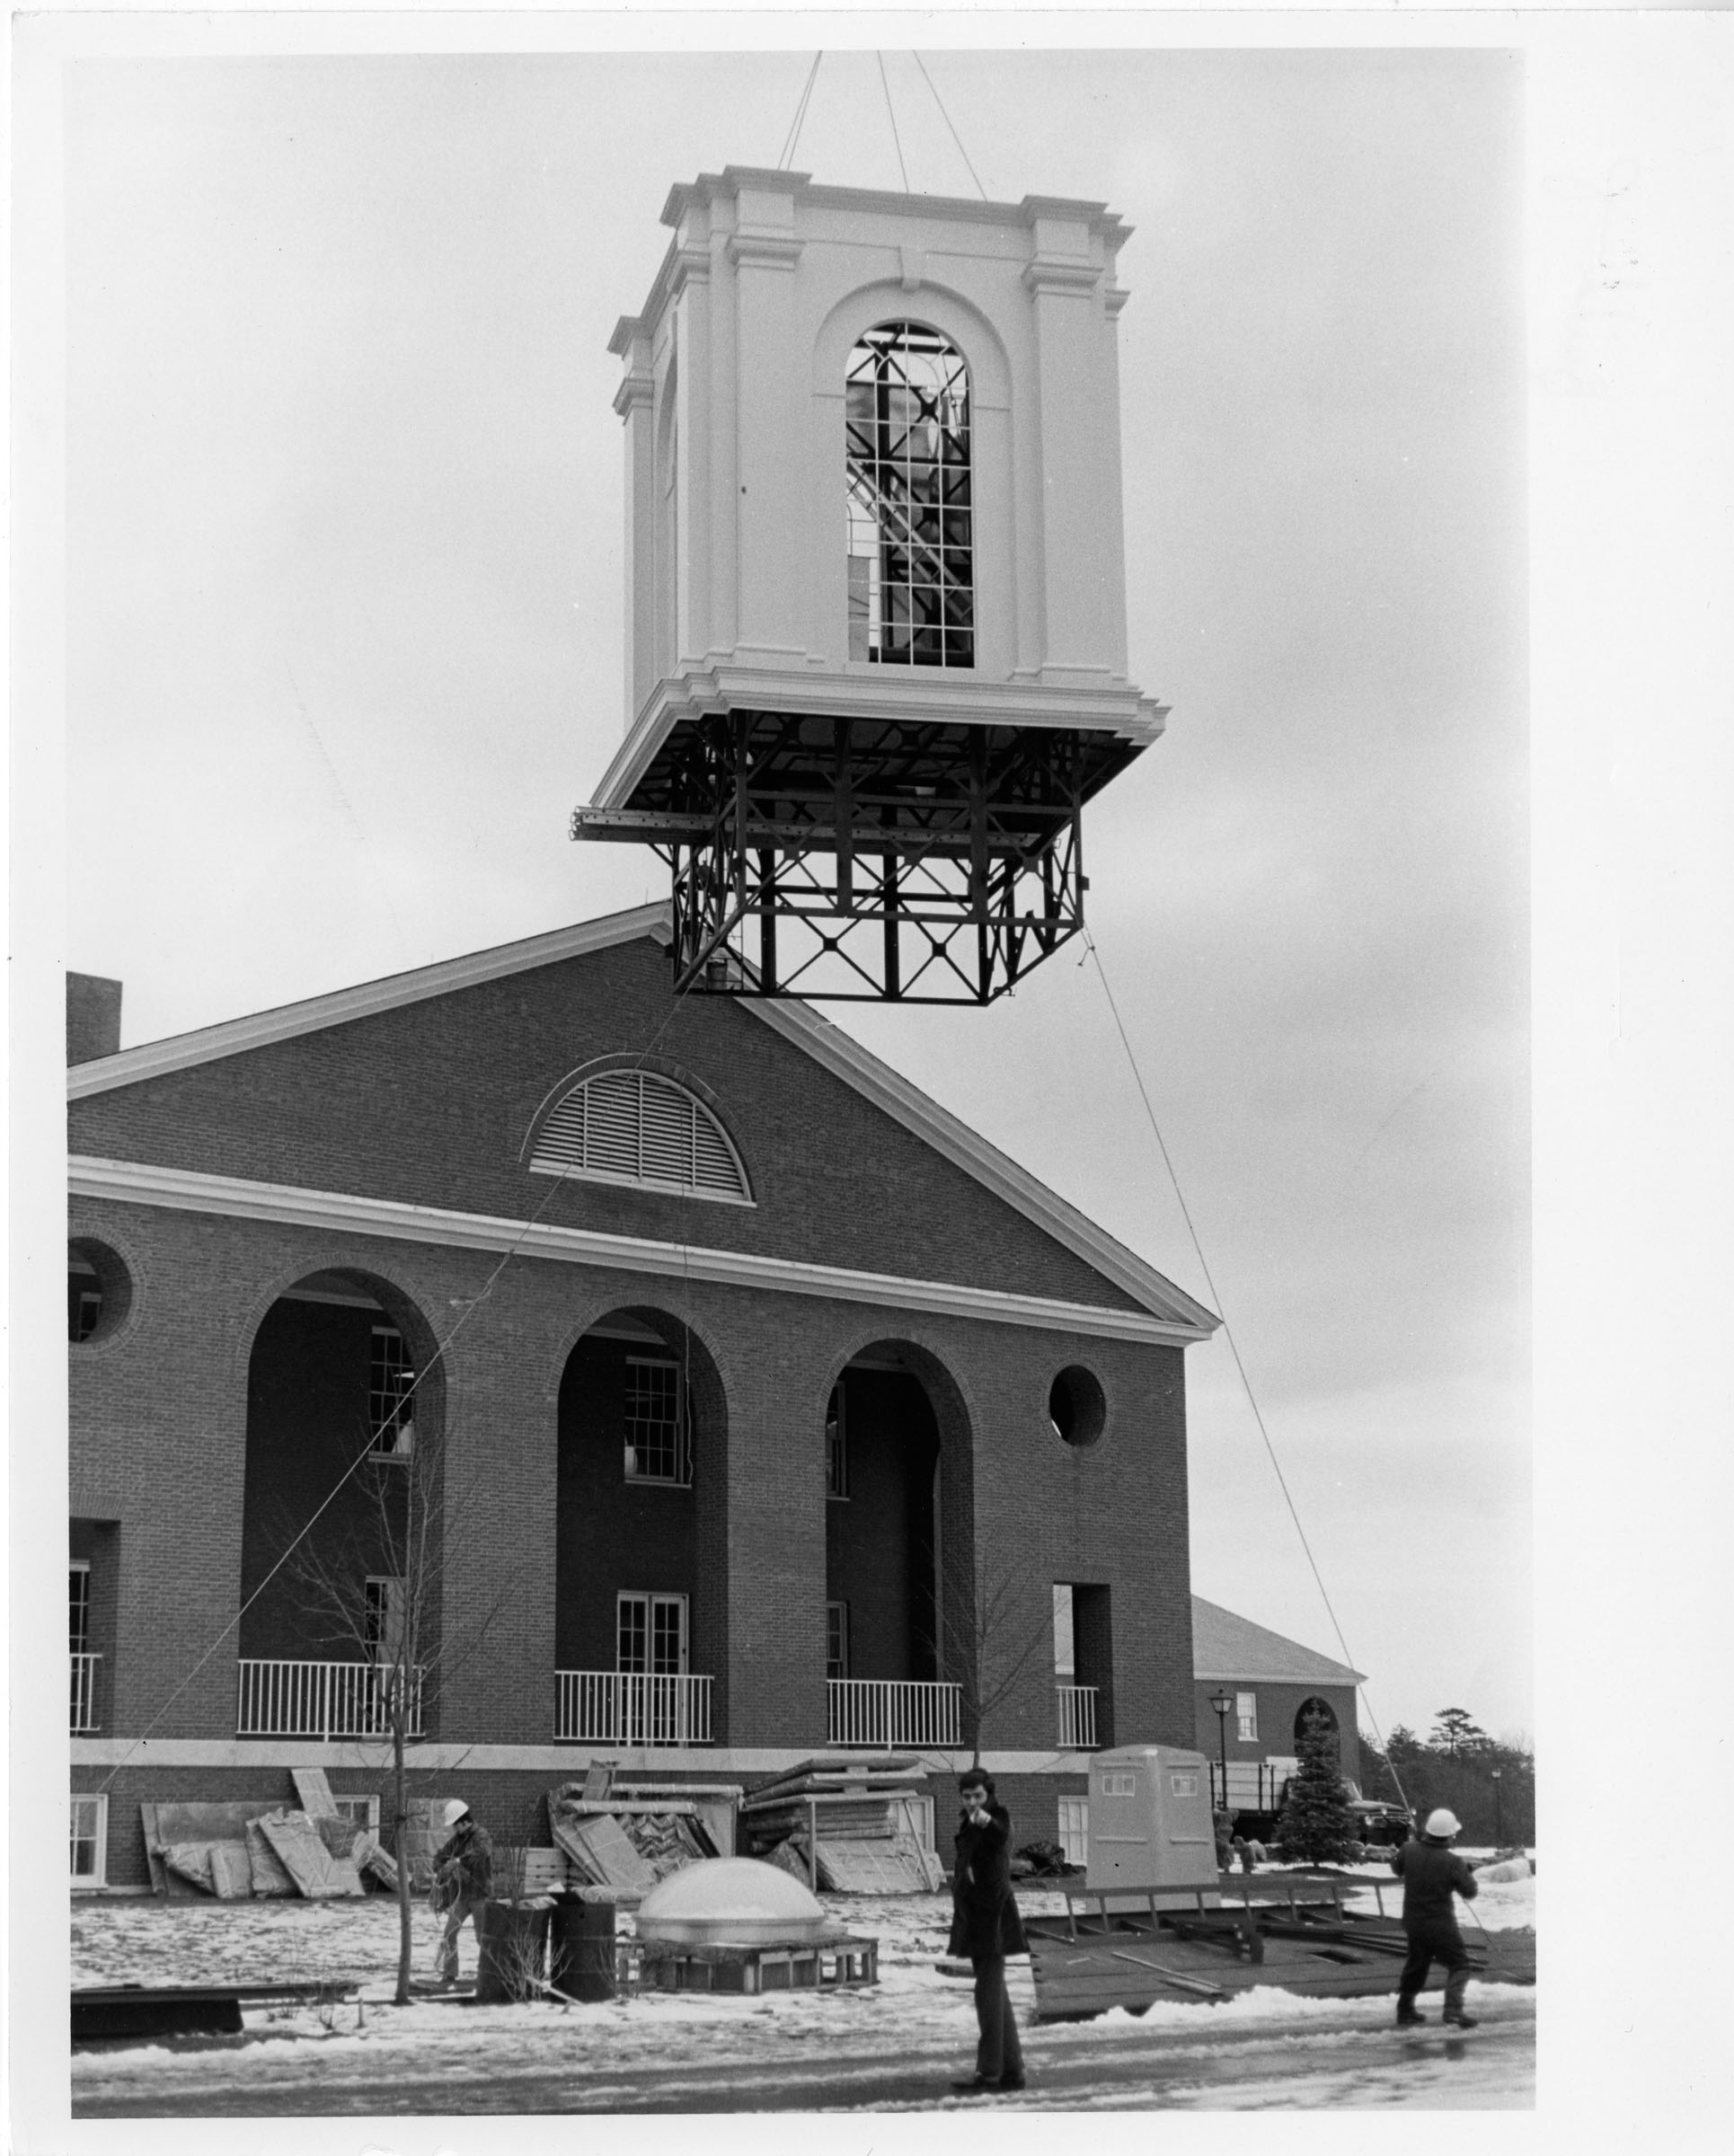 One part of the Library clocktower hangs in the air as it's being lifted to be placed. A man in the foreground points at the camera.